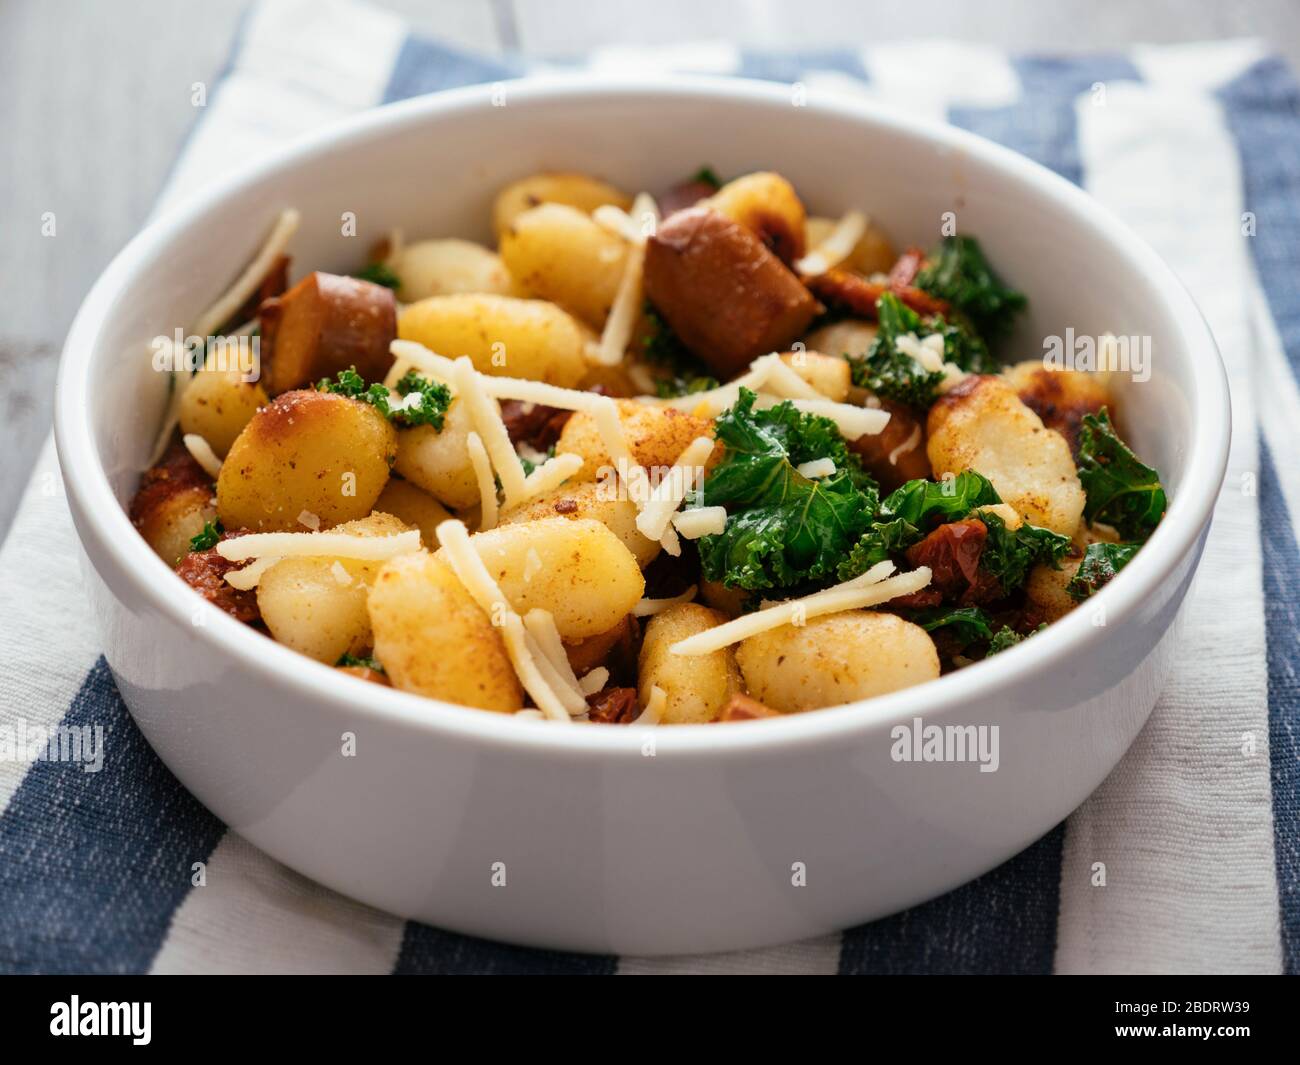 Gnocchi With Vegan Sausage Kale And Sun Dried Tomatoes Stock Photo Alamy